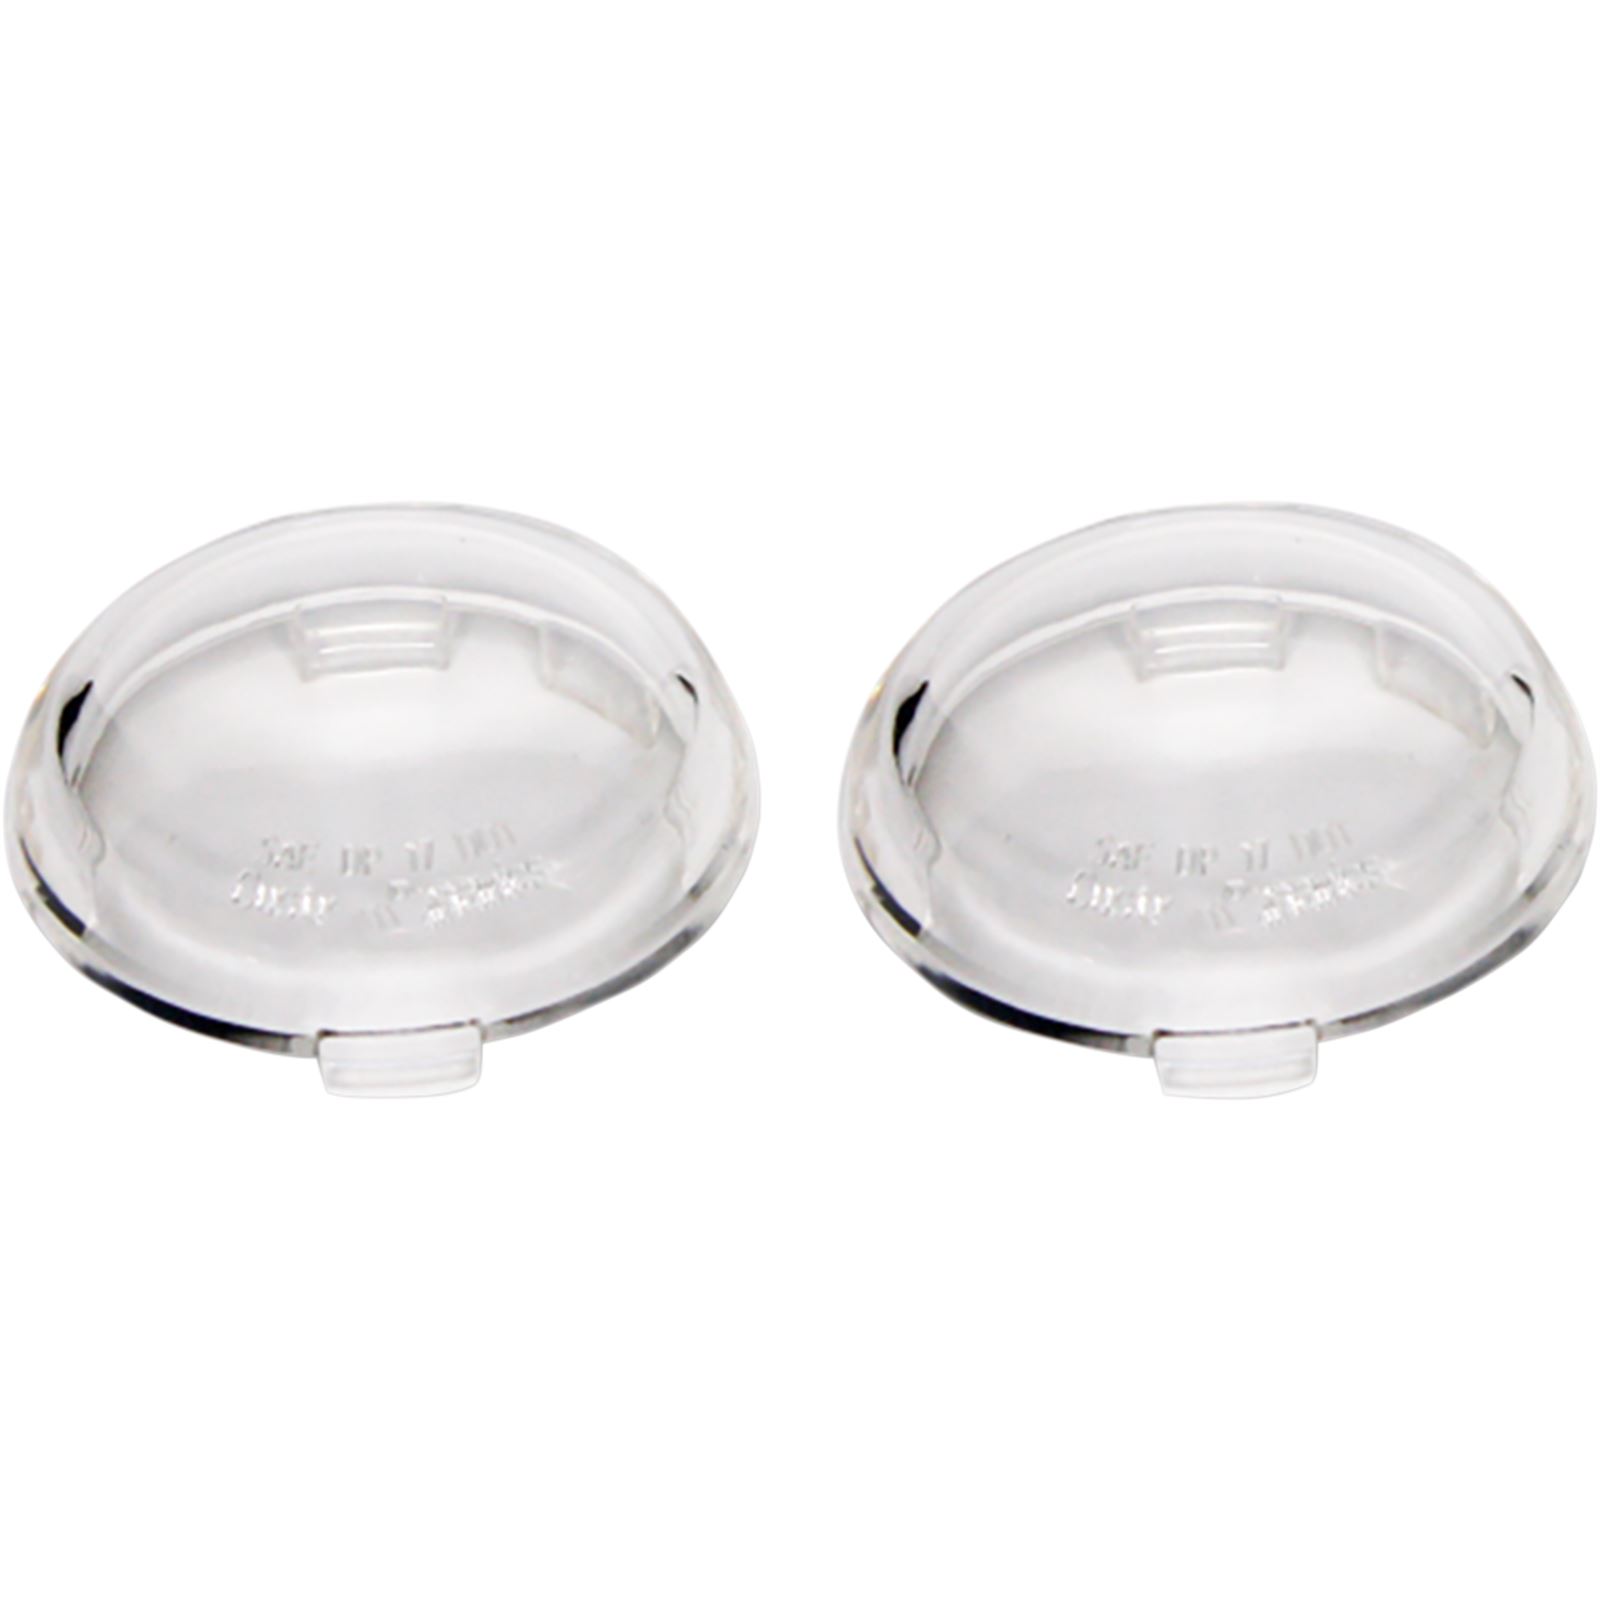 Custom Dynamics ProBEAM® Replacement Lenses - Clear